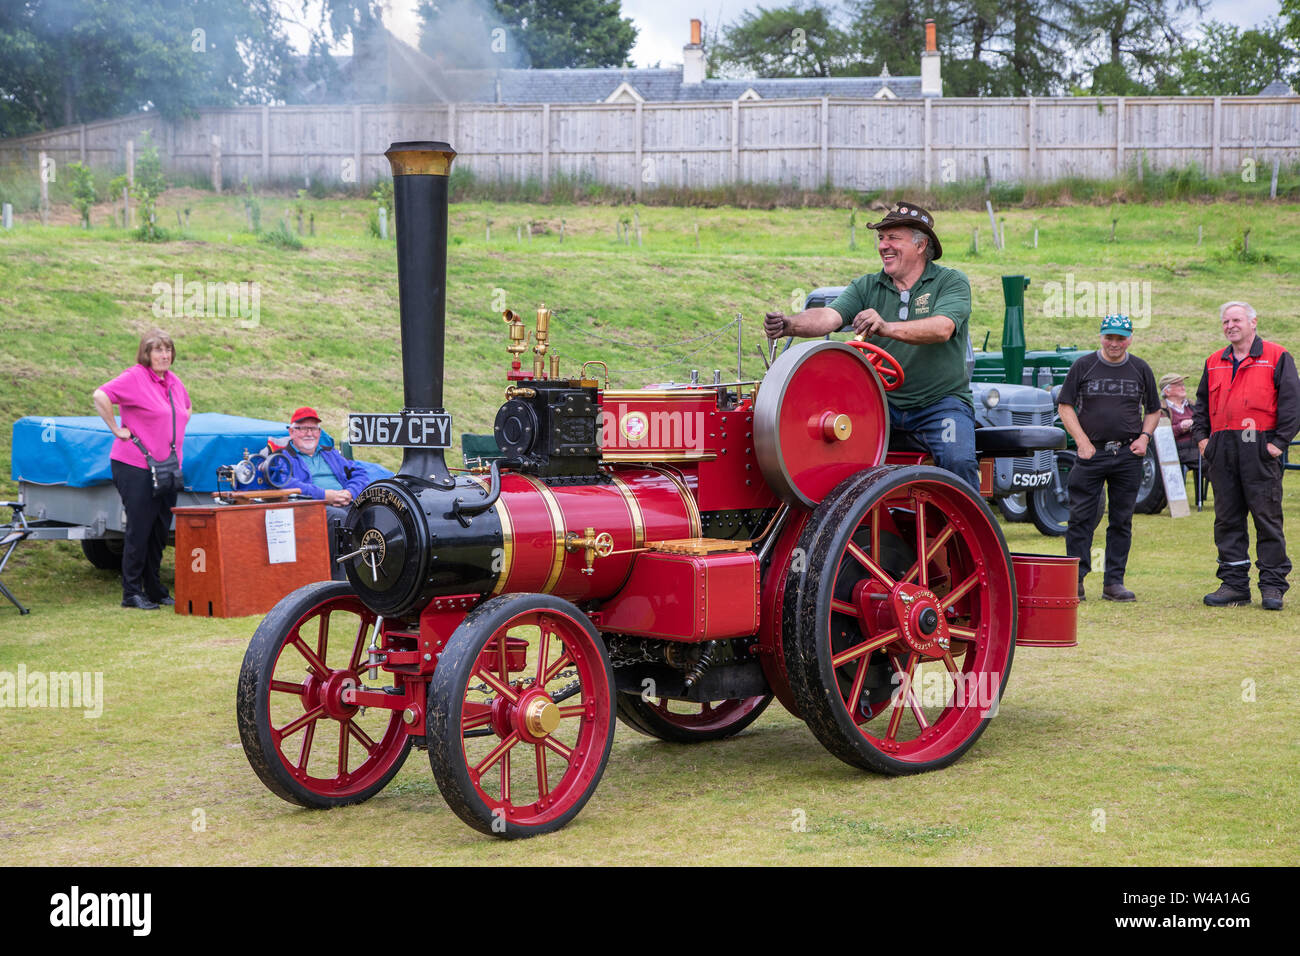 Grantown East, UK. 21 July 2019. The first steam rally held at Grantown  East, Morayshire, UK proved popular with a steam engine and vintage  enthusiasts as well as spectators. Picture of DAVIE